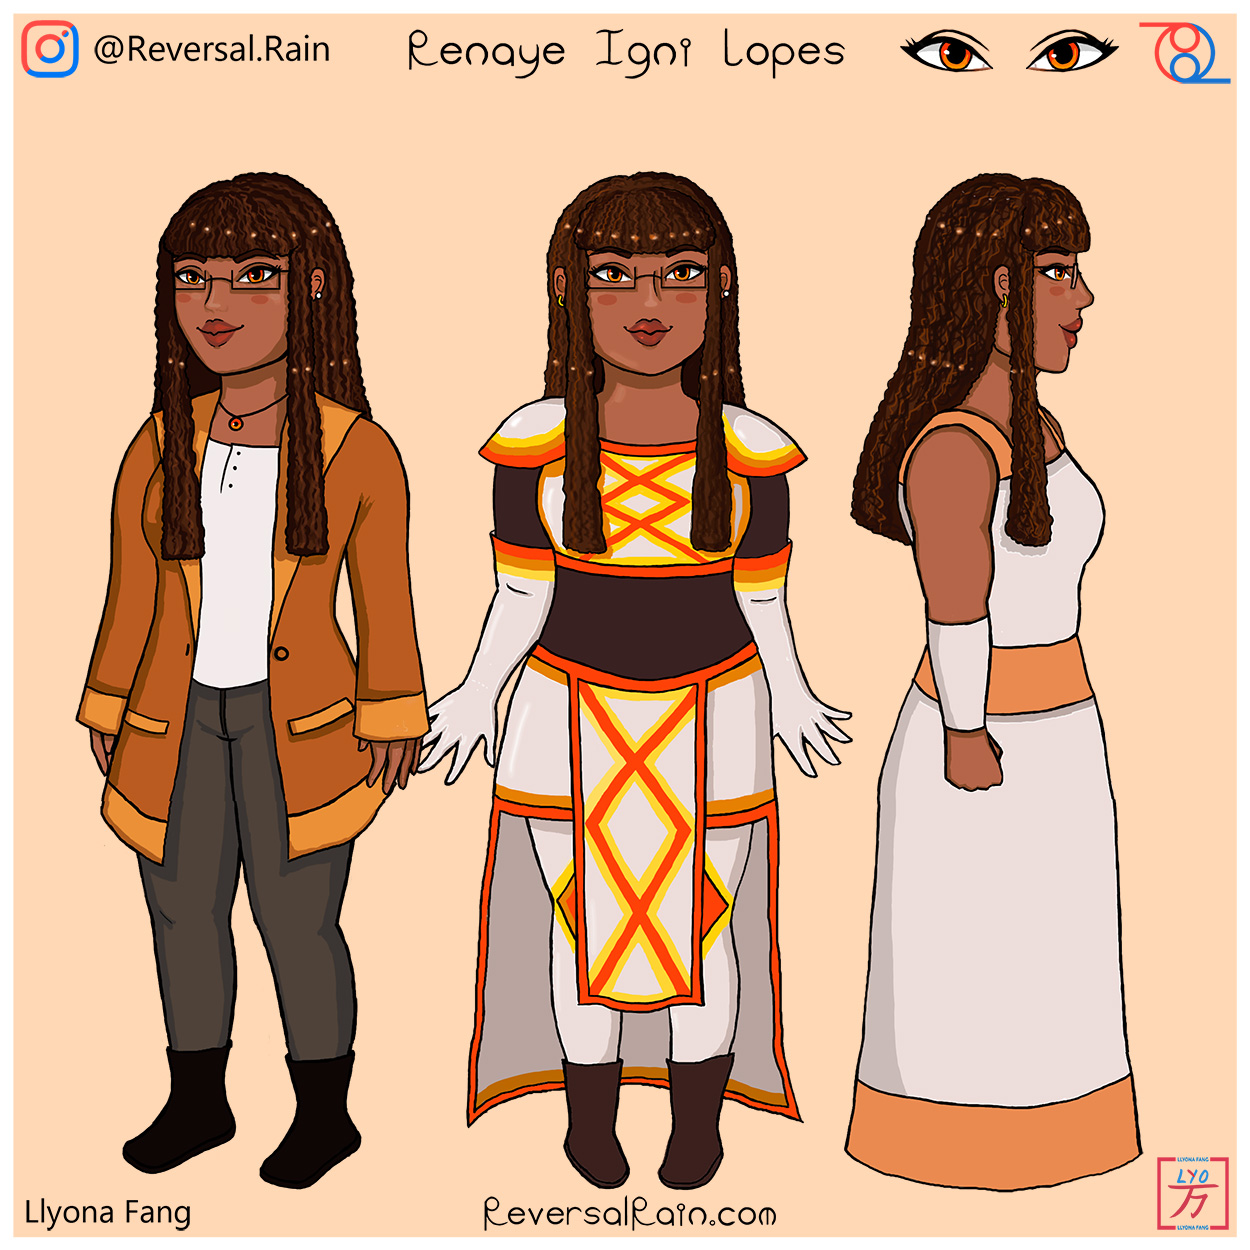 <p><h4>🧡🔥 Renaye Igni Lopes 🔥🧡</h4></p>
            <p>A technician, tailor, and jazz musician!</p>
            <p>🎶 Instrument: Trumpet</p>
              <p>The daughter of the village weaver and a retired trumpeter won't mess around when it comes to business. As a child prodigy, her work ethic and management
                skills quickly earn the respect of her superiors, rewarding her with the coolest job opportunities of any teenager in the region.
                You might find her tending to the flames in the local desalination plant, or working backstage in the village theatre to make sure
                the lighting is just right. She'll usually kick back at The Queen Been after her shifts, but don't worry, she knows to be home
                before the sun disappears. You might have a little trouble sleeping if you happen to be her neighbor though; the flare of her
                trumpet blasts an evening fanfare when her father makes her practice. Her free nights are spent meticulously sewing to bring her
                friend's fashion designs to life.<p><p>
                <p>» <i>Click to exit description!</i> «</p> </p>
              